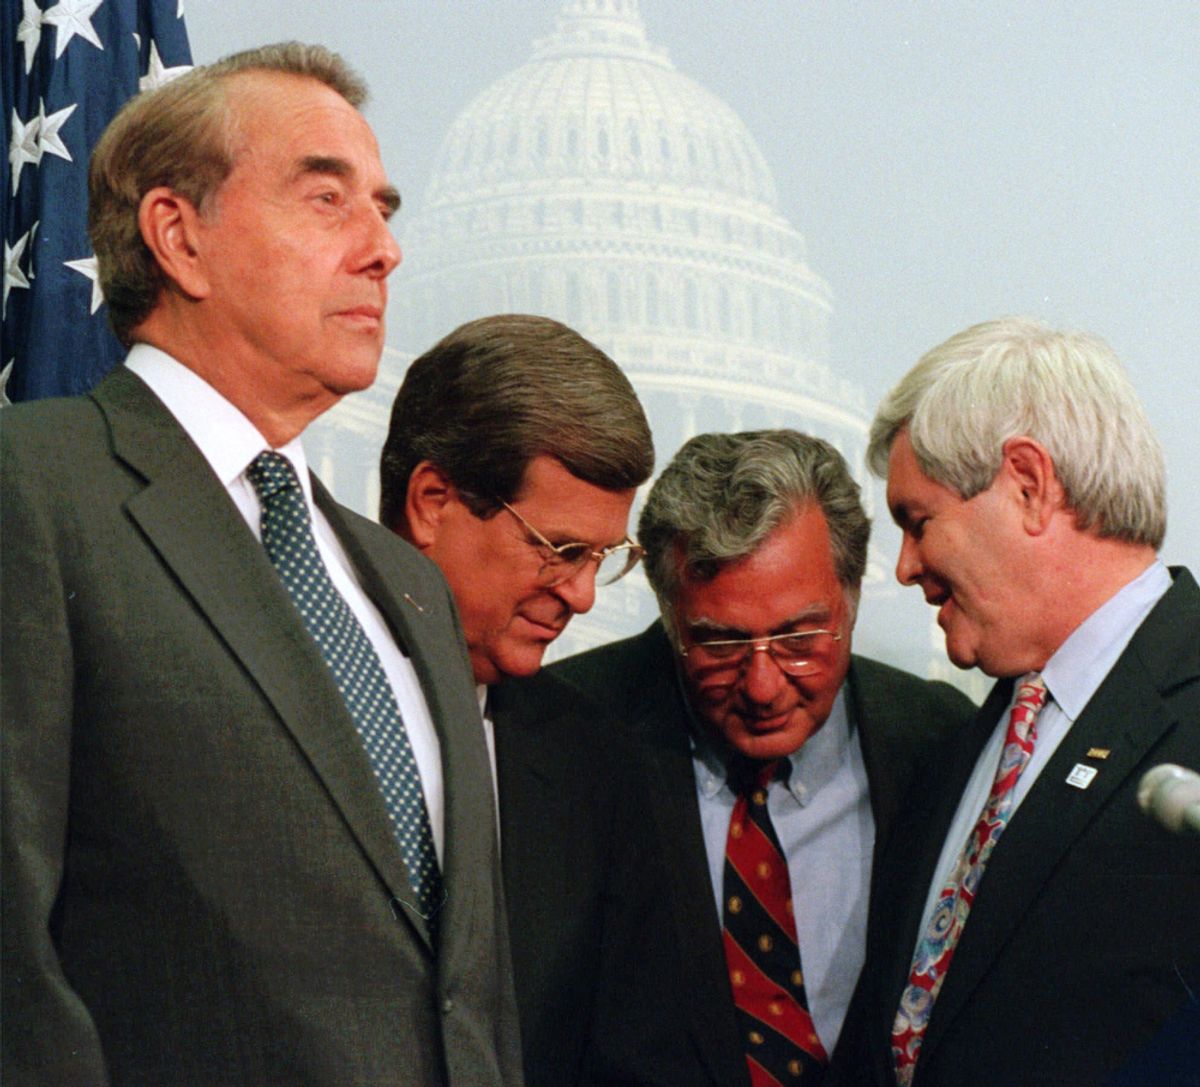 House Speaker Newt Gingrich of Ga., right, huddles with, from second from right, House Majority Leader Dick Armey of Texas, Senate Majority Whip Trent Lott of Miss., and Senate Majority Leader Bob Dole of Kan., during a Capitol Hill news conference in this Sept. 6, 1995 photo.  (AP Photo/John Duricka)   (John Duricka)